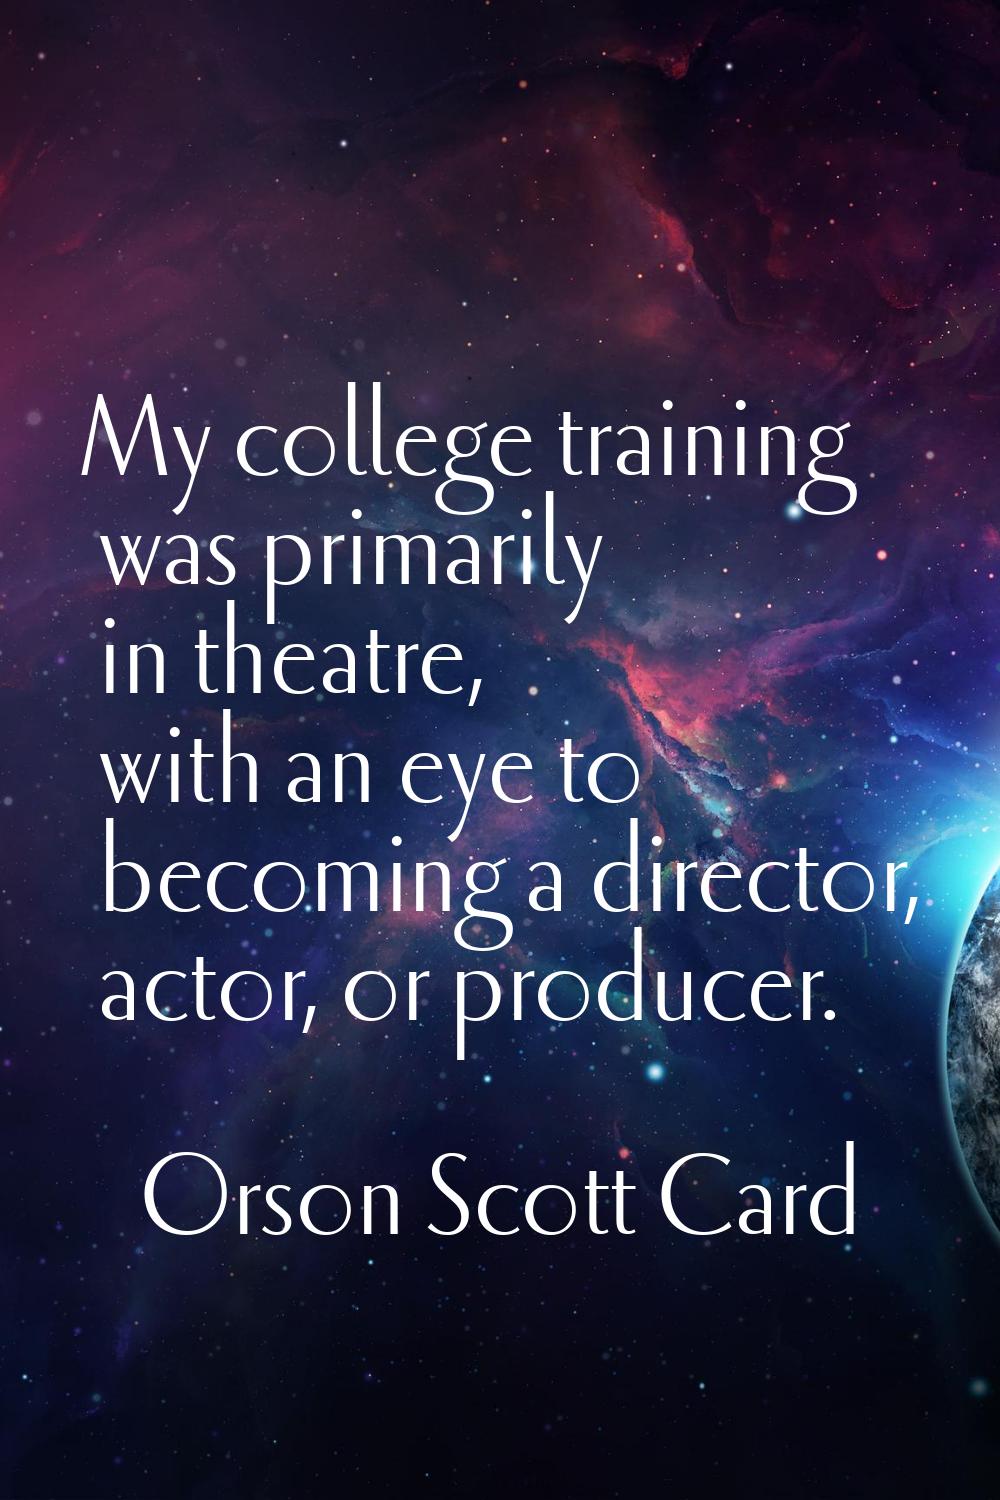 My college training was primarily in theatre, with an eye to becoming a director, actor, or produce